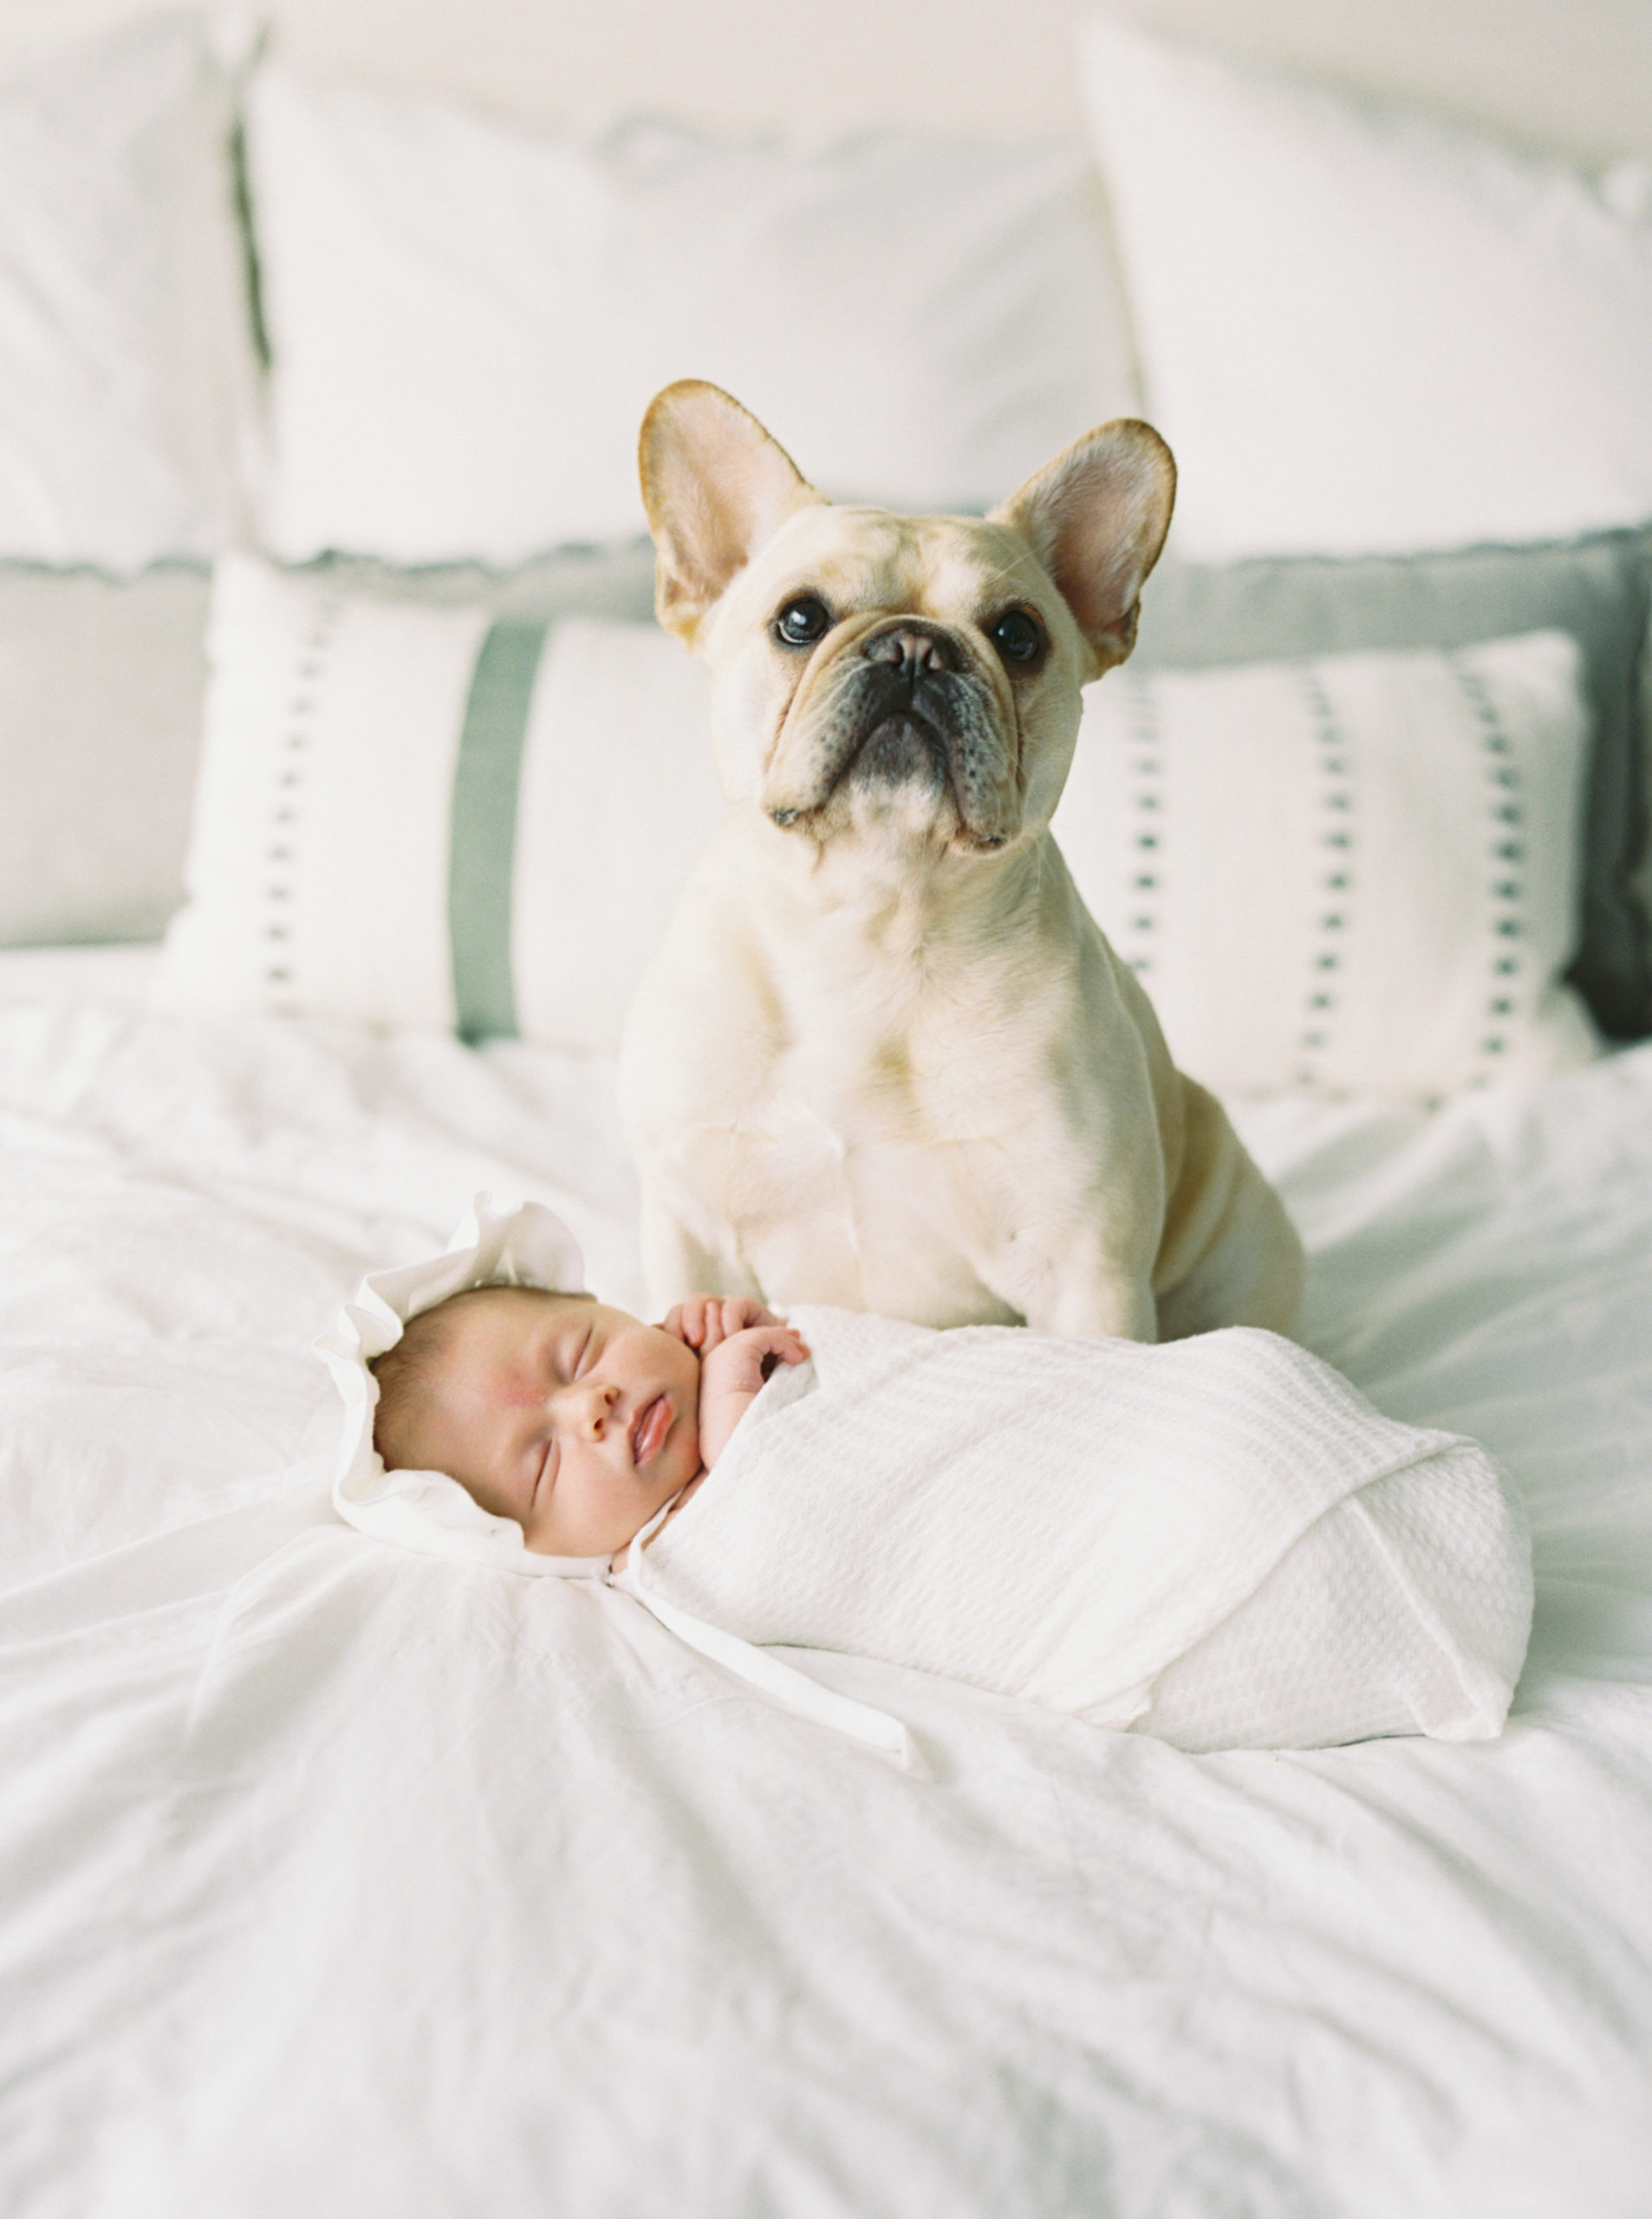 Family dog cuddling baby in a beautiful, bright bedroom